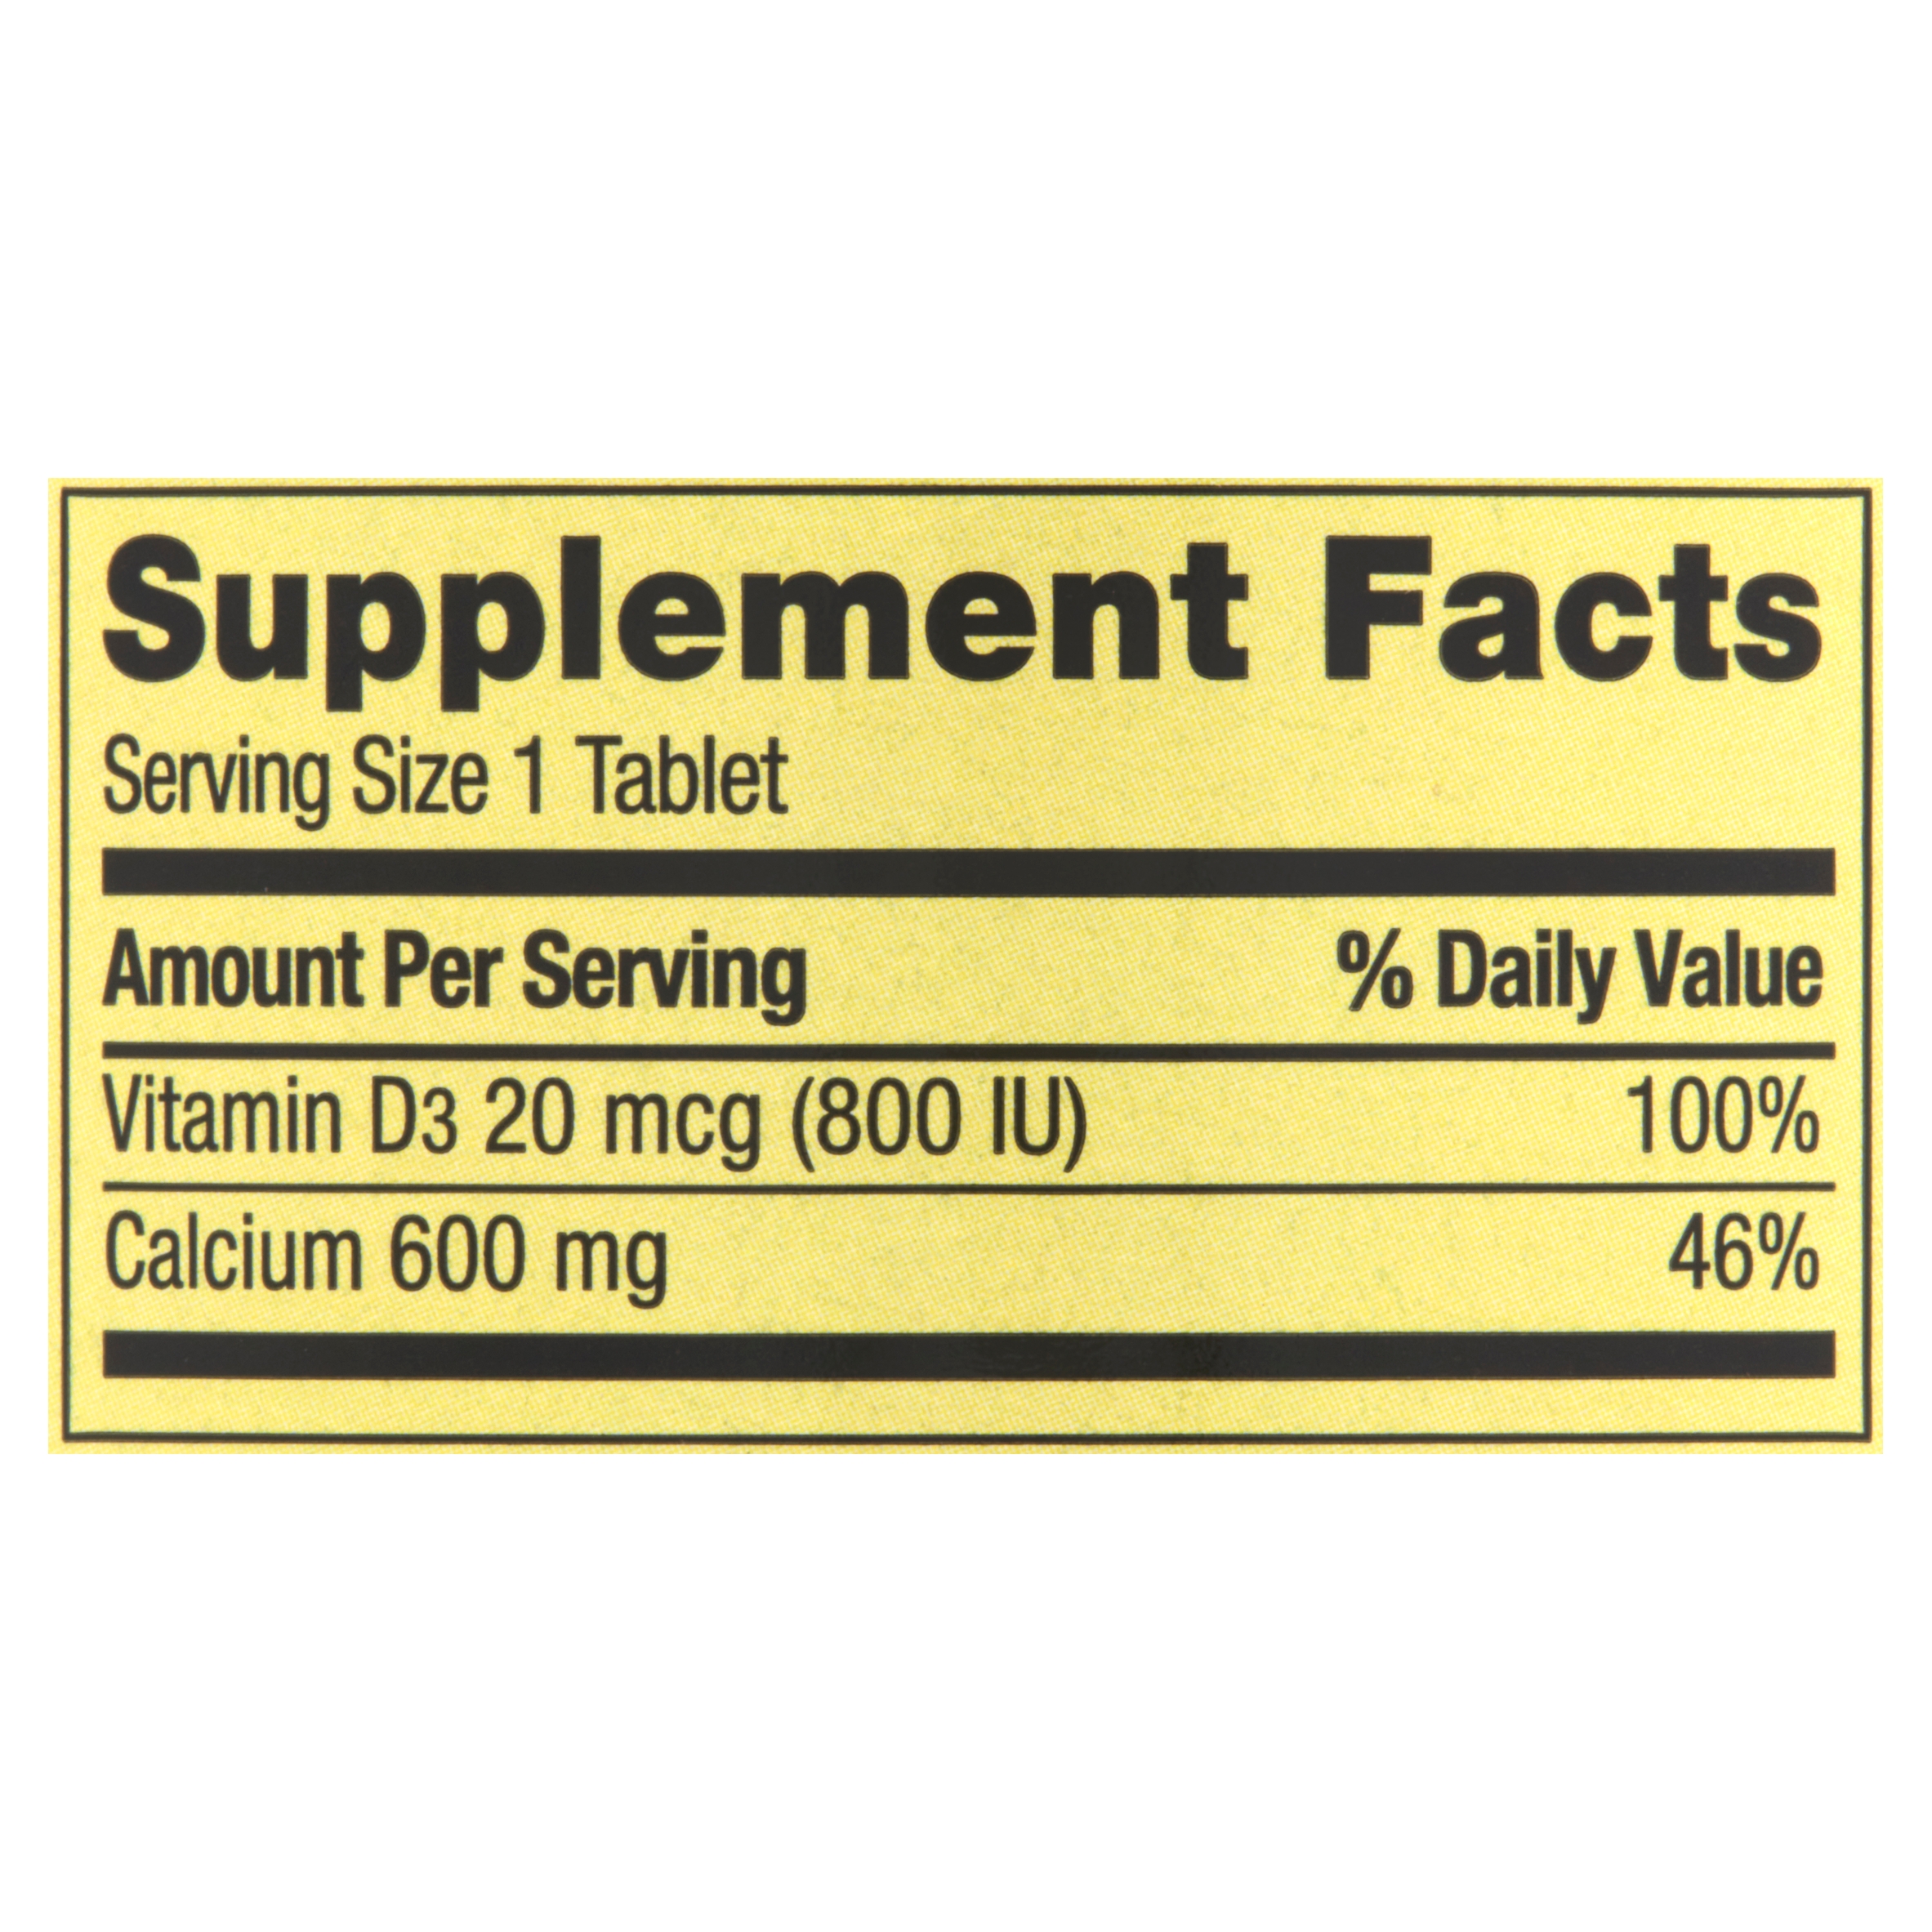 Spring Valley Calcium Plus Vitamin D3 Dietary Supplement, 600 mg, 250 Count, 2 Pack - image 4 of 9